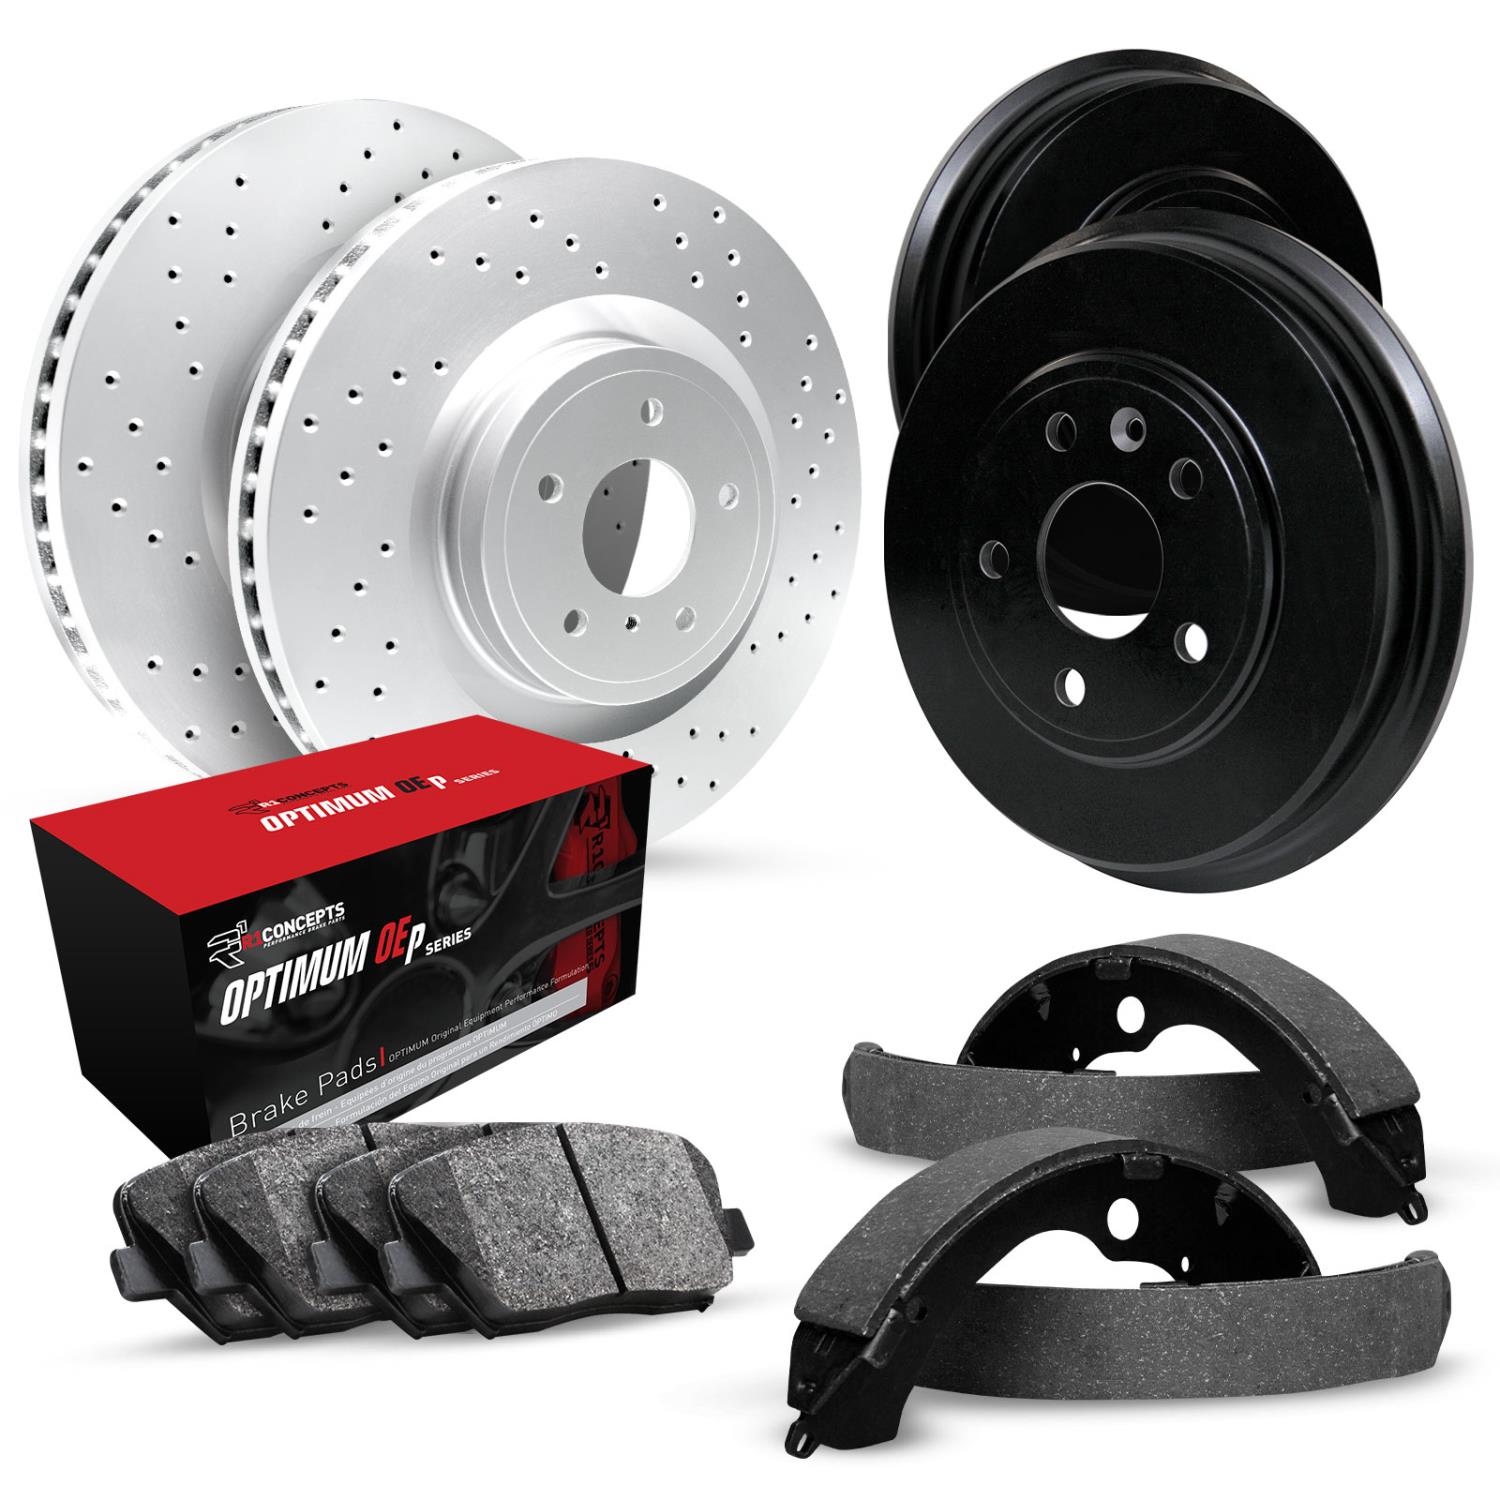 GEO-Carbon Drilled Brake Rotor & Drum Set w/Optimum OE Pads & Shoes, 1988-1989 GM, Position: Front & Rear